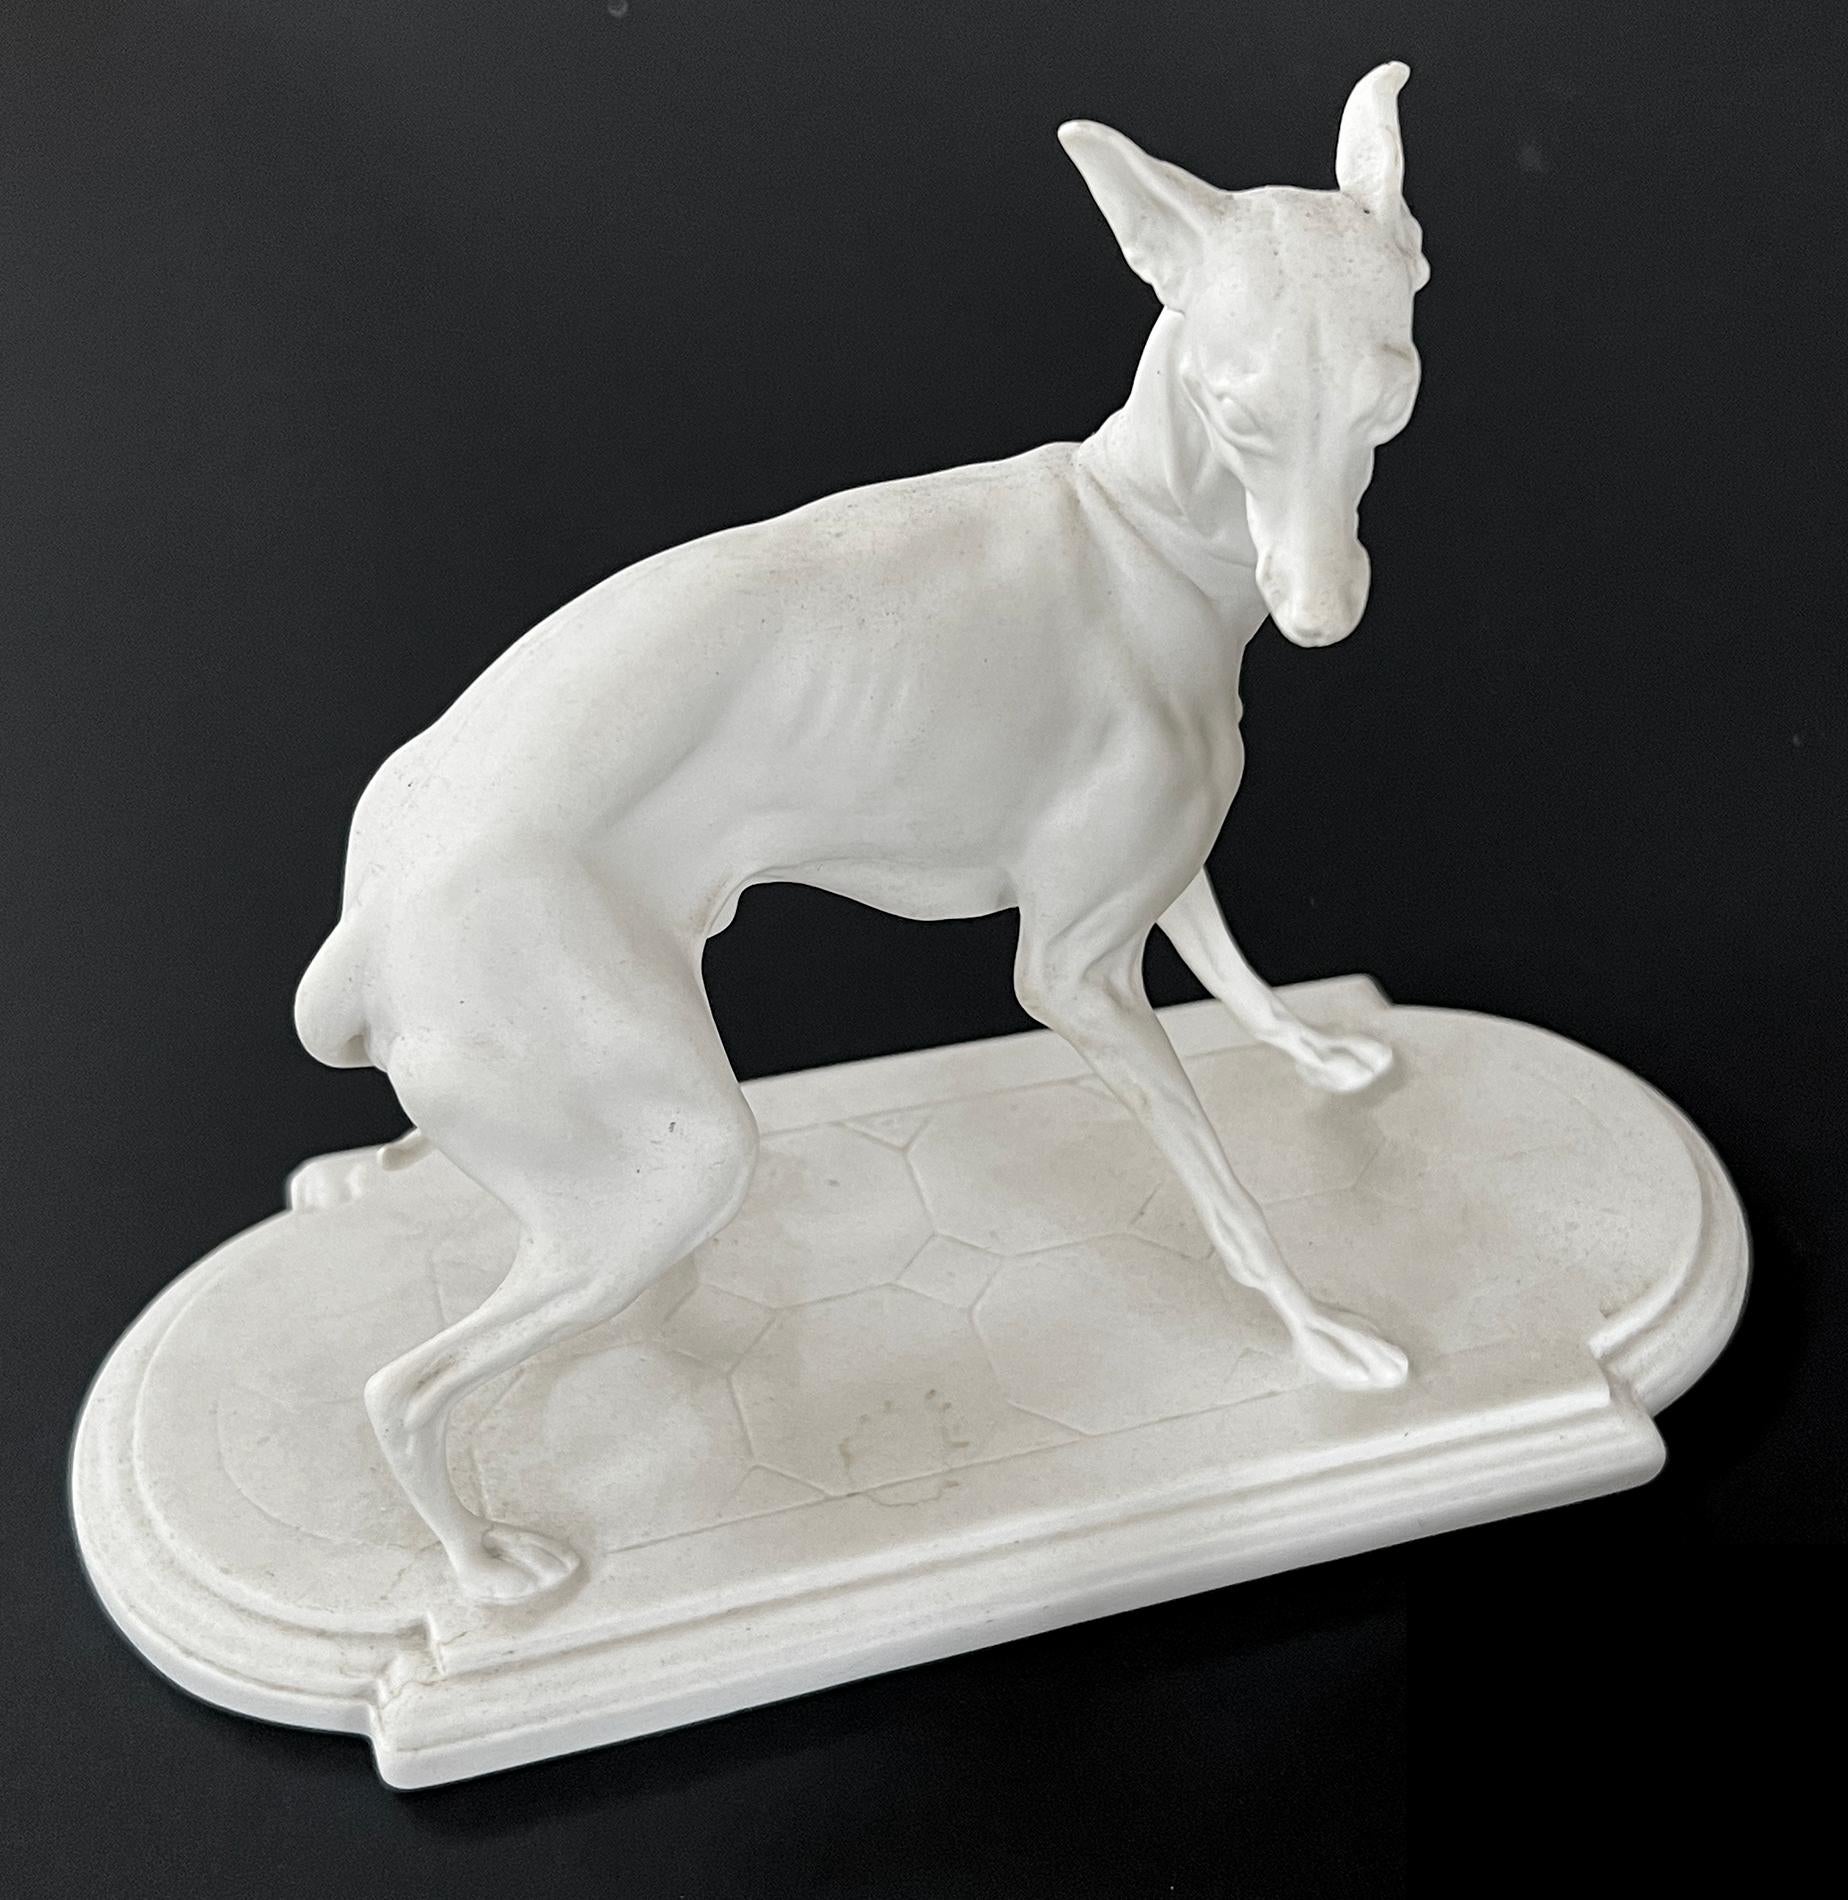 Other A Rare Pair of Bisque Porcelain Whippet Figurines by Boehm Studios For Sale